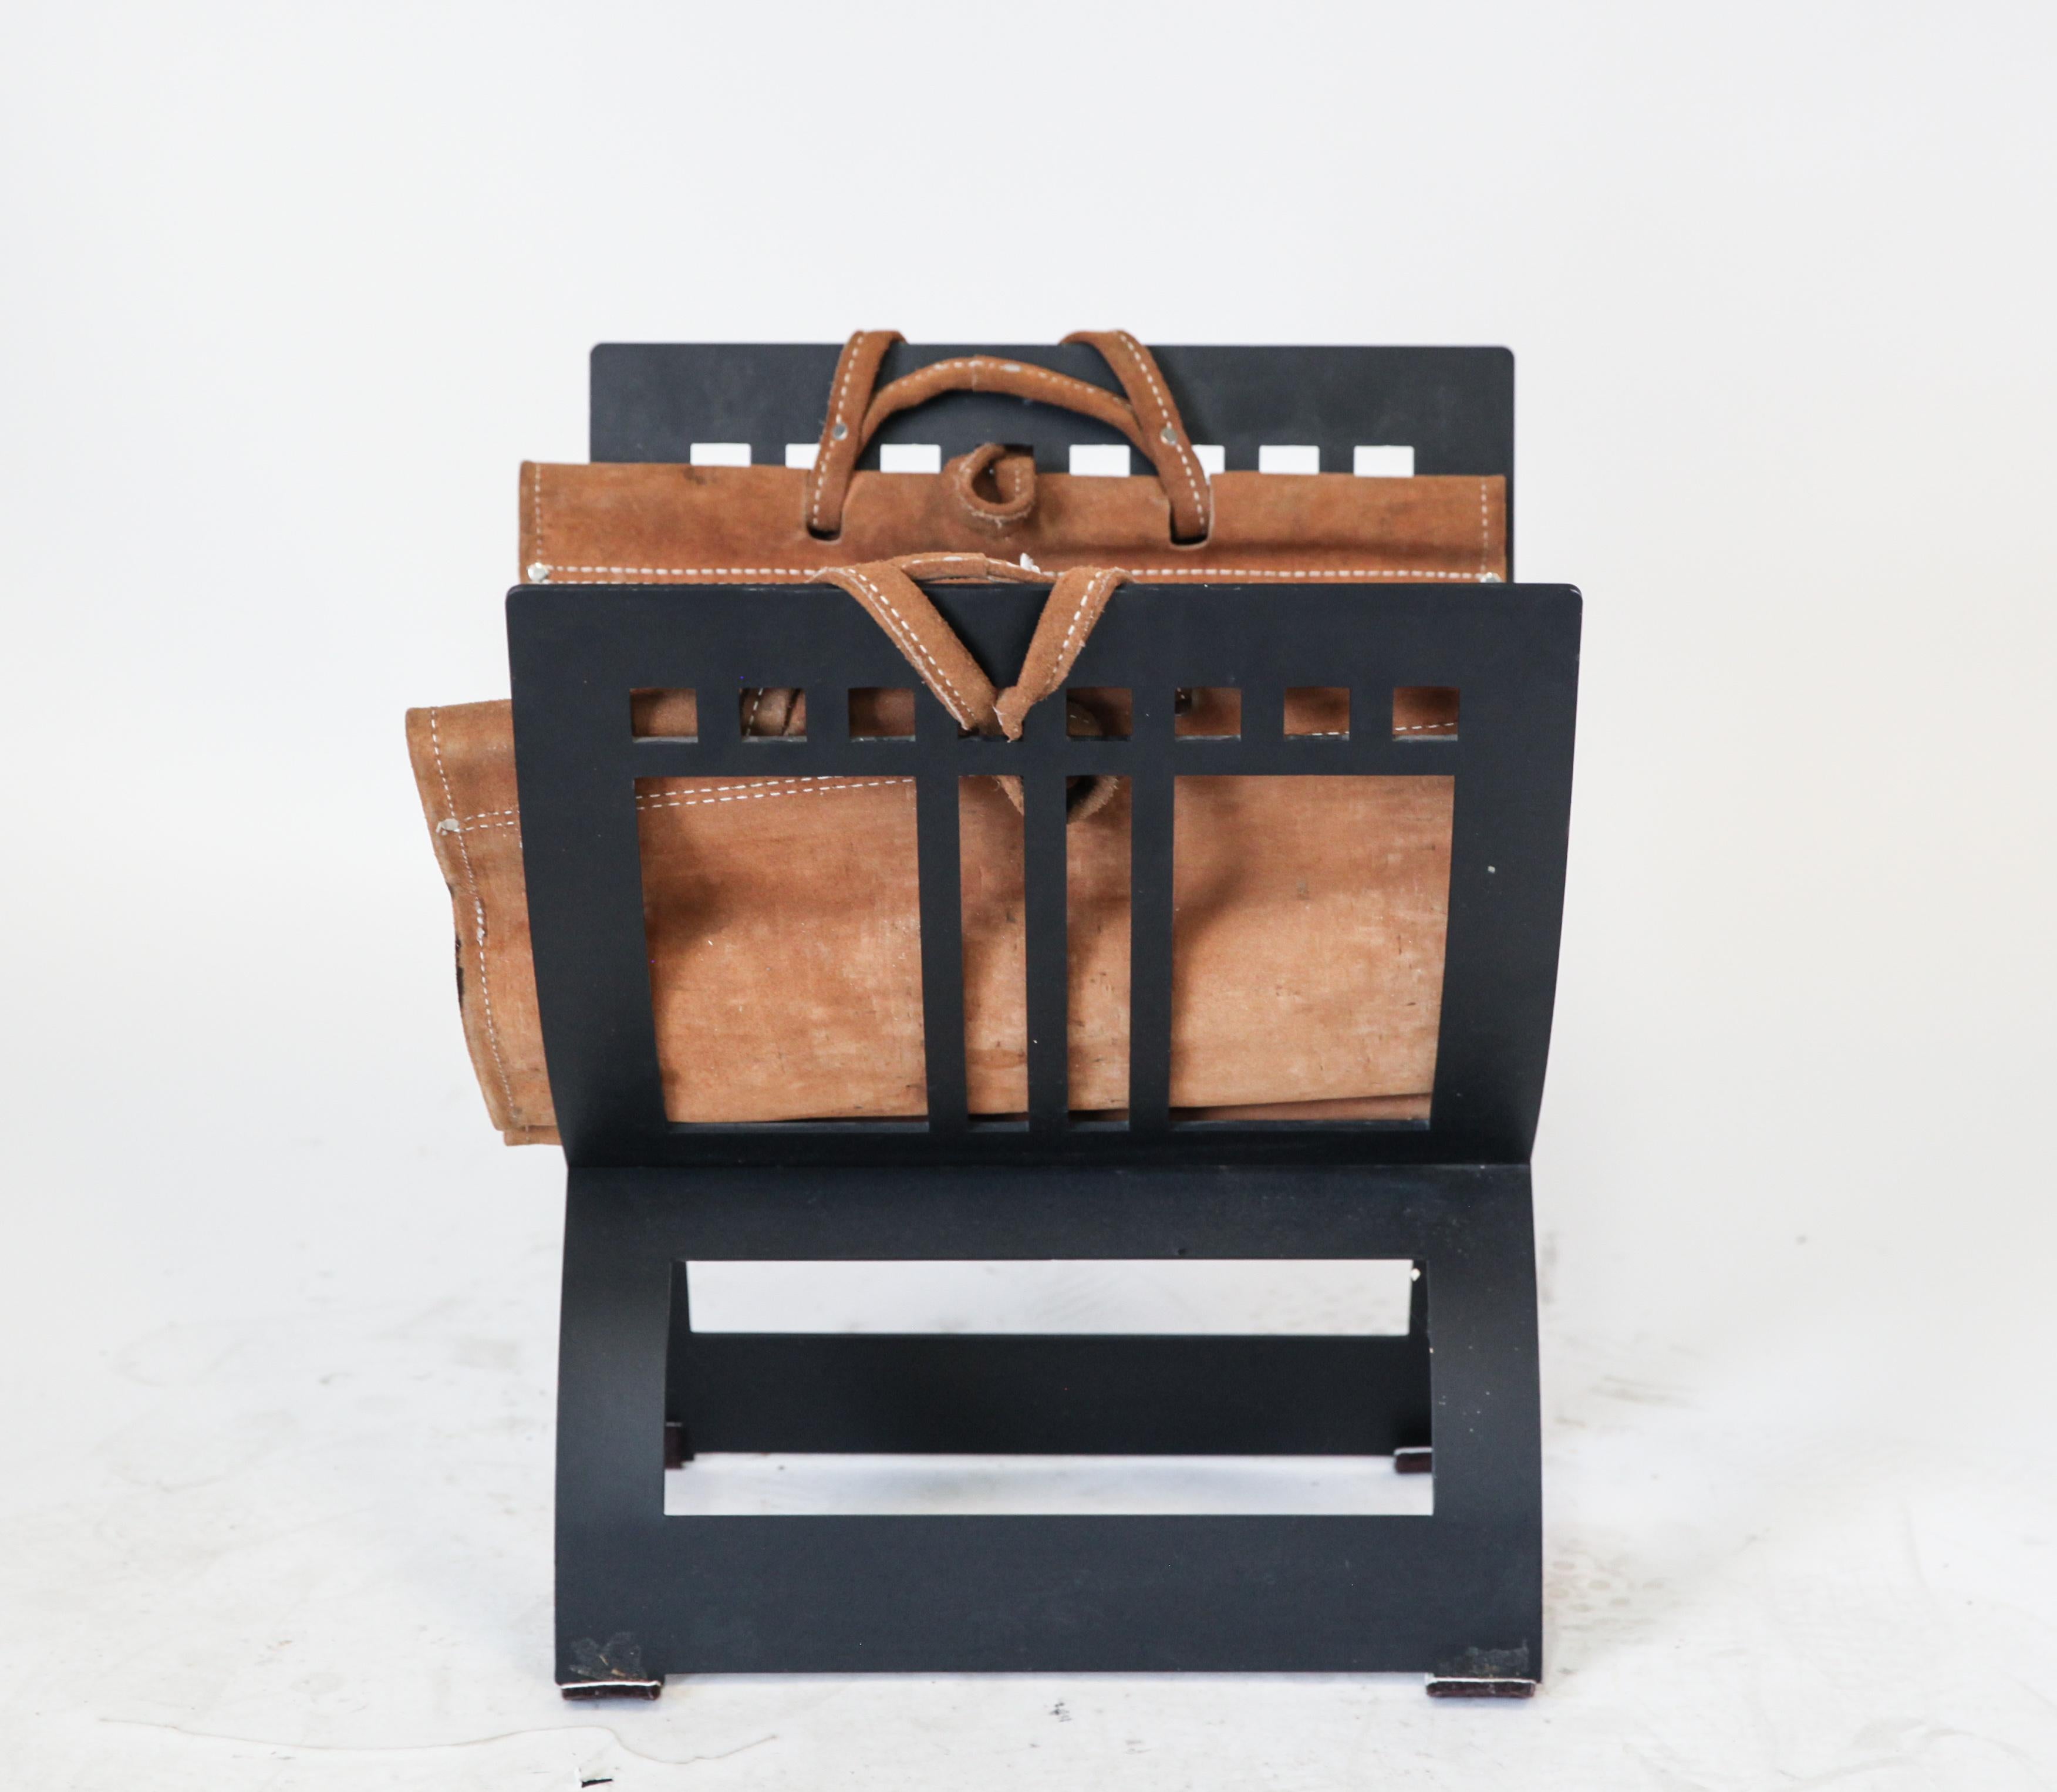 Roman manner steel magazine or newspaper rack in curule form. The piece has a tan hide for holding the magazines and is in great vintage condition with age-appropriate wear and use. Measures: 19.25